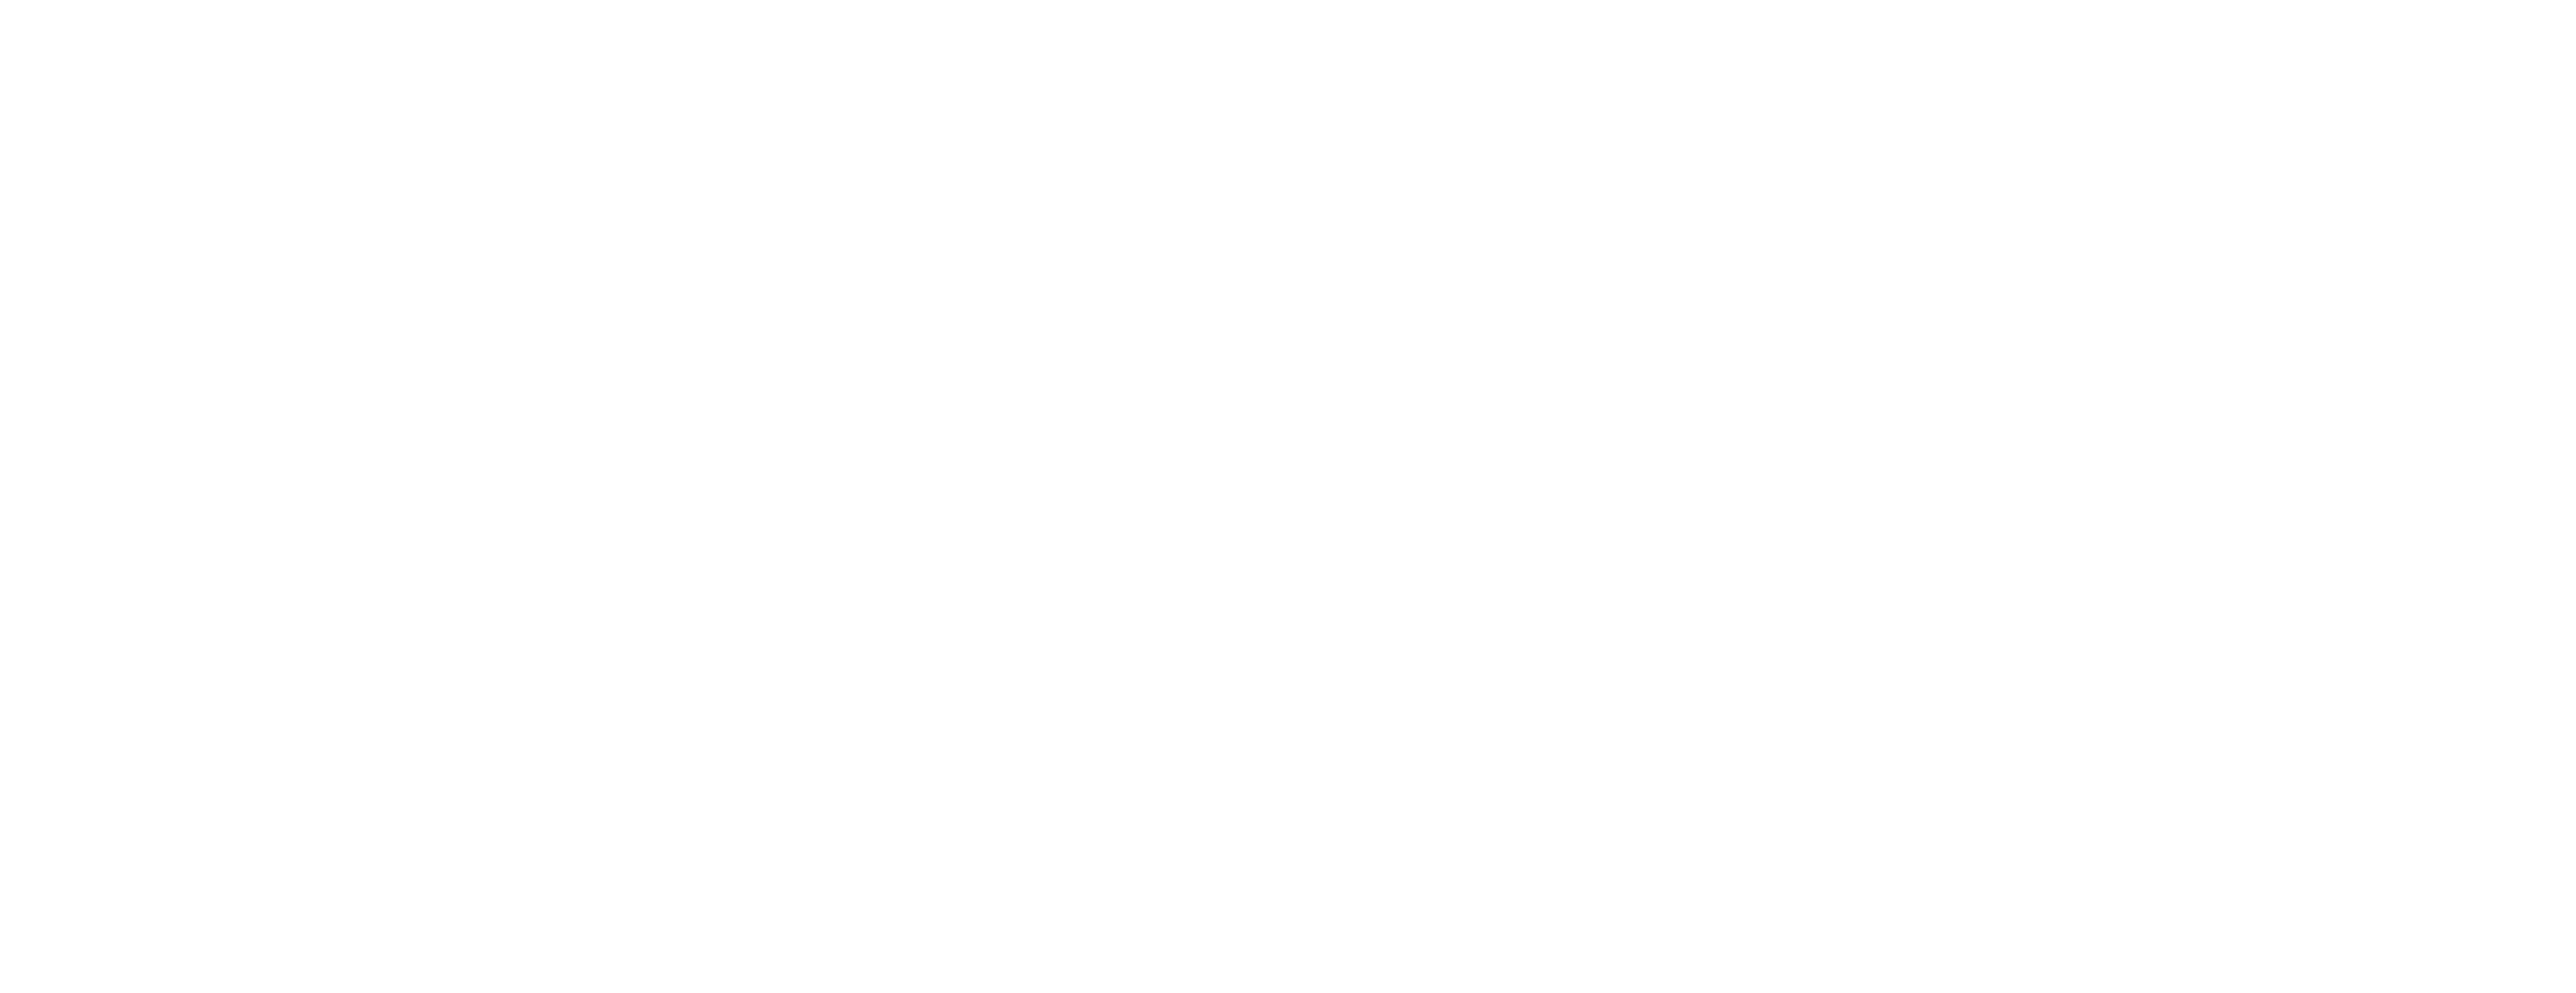 The Snail and the Whale logo